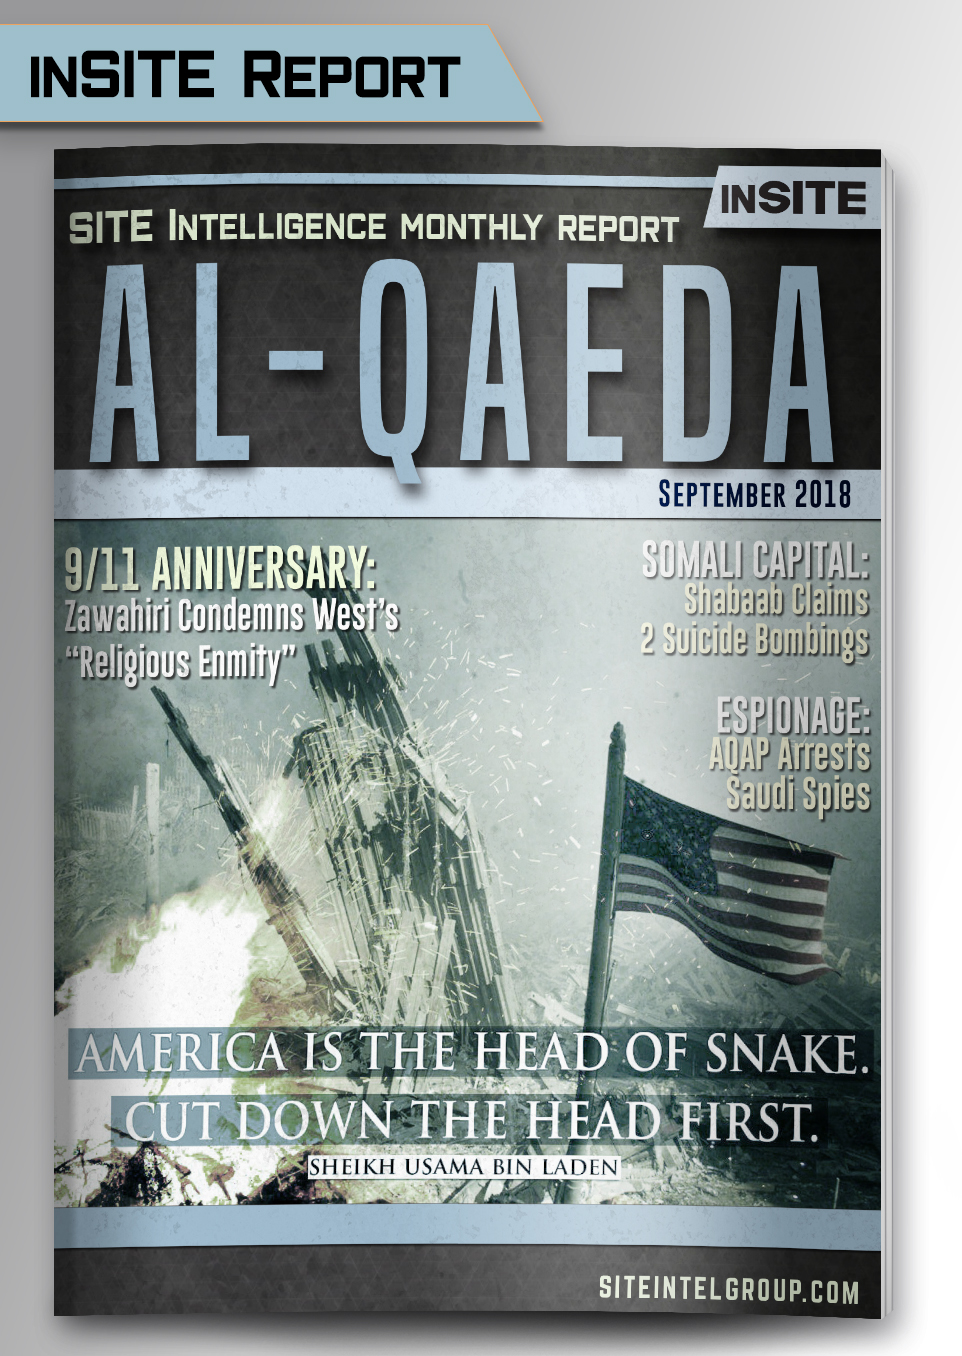 Monthly inSITE Report on Al-Qaeda for September 2018